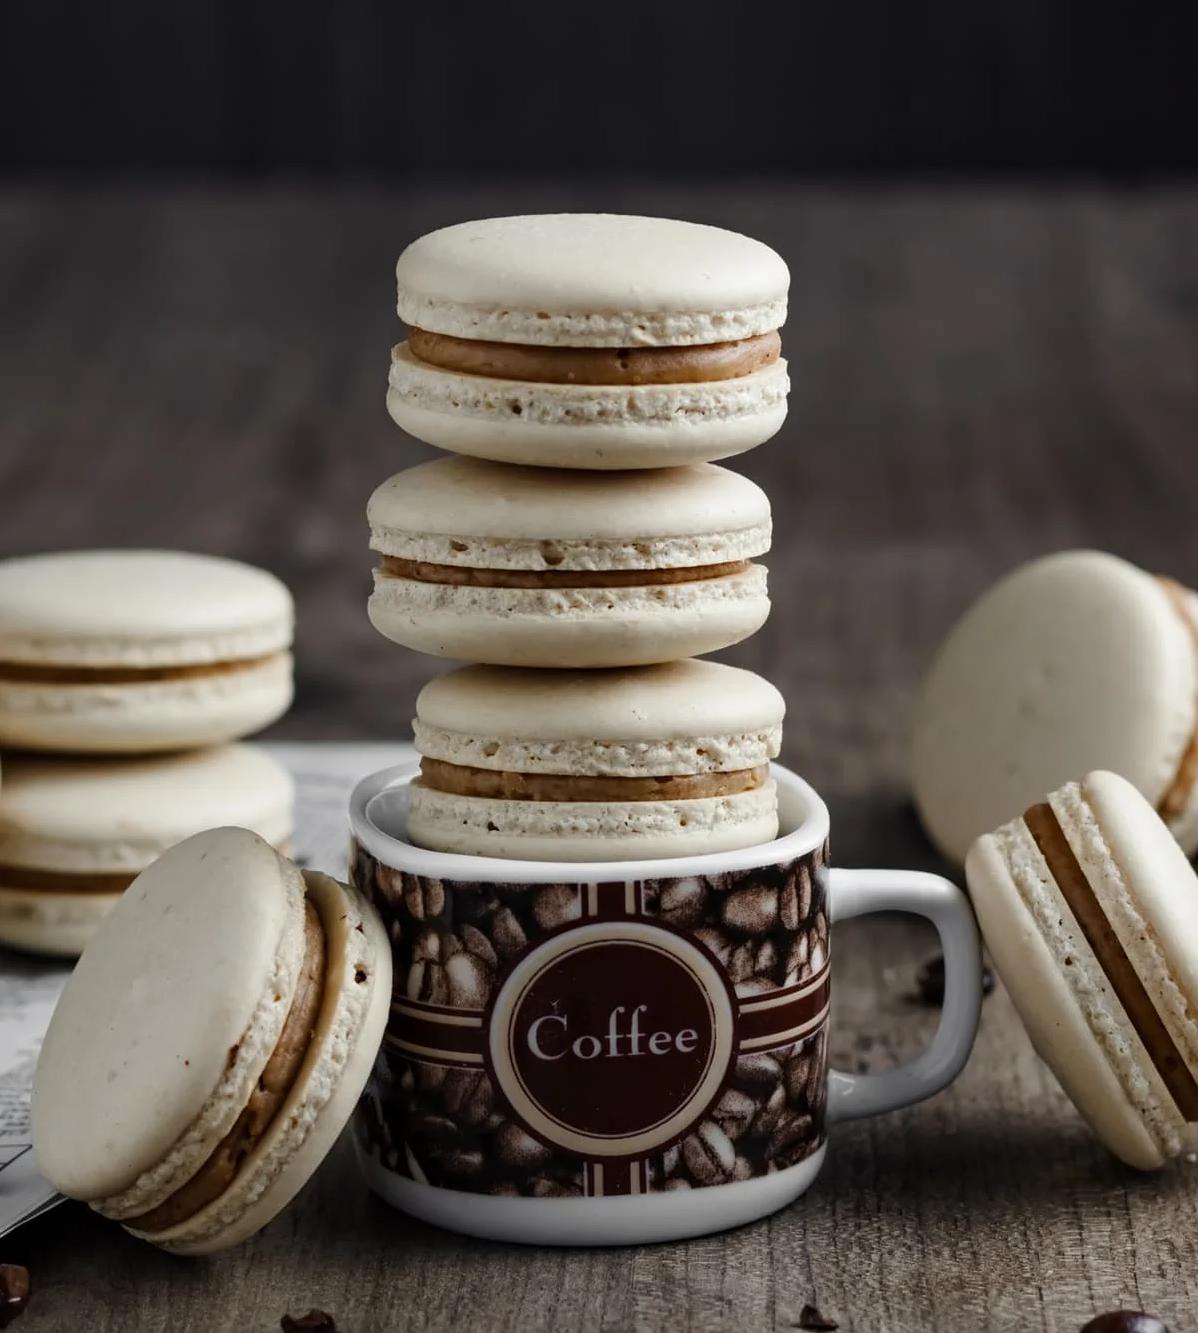  The perfect accompaniment to your favorite coffee or tea, these macaroons are the ultimate indulgence.